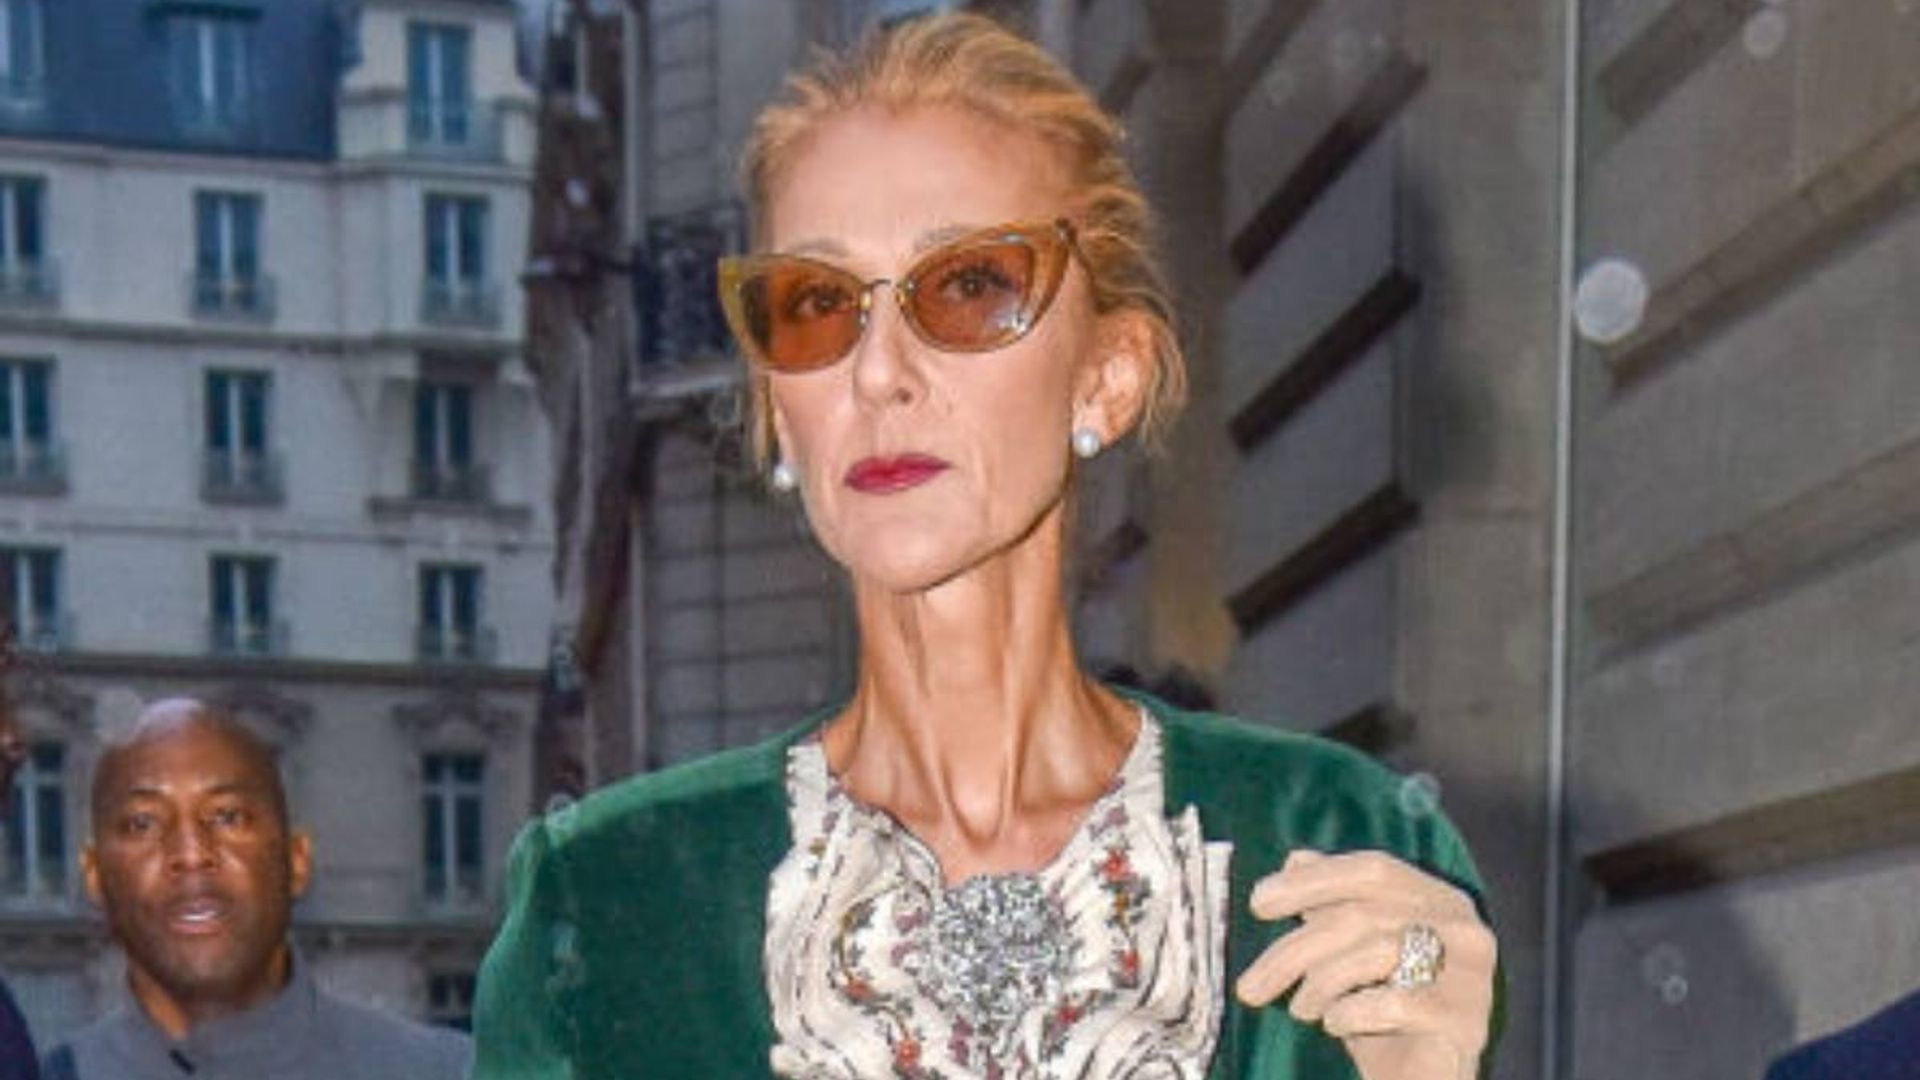 Celine Dion looks unrecognizable in photo nobody was expecting | HELLO!